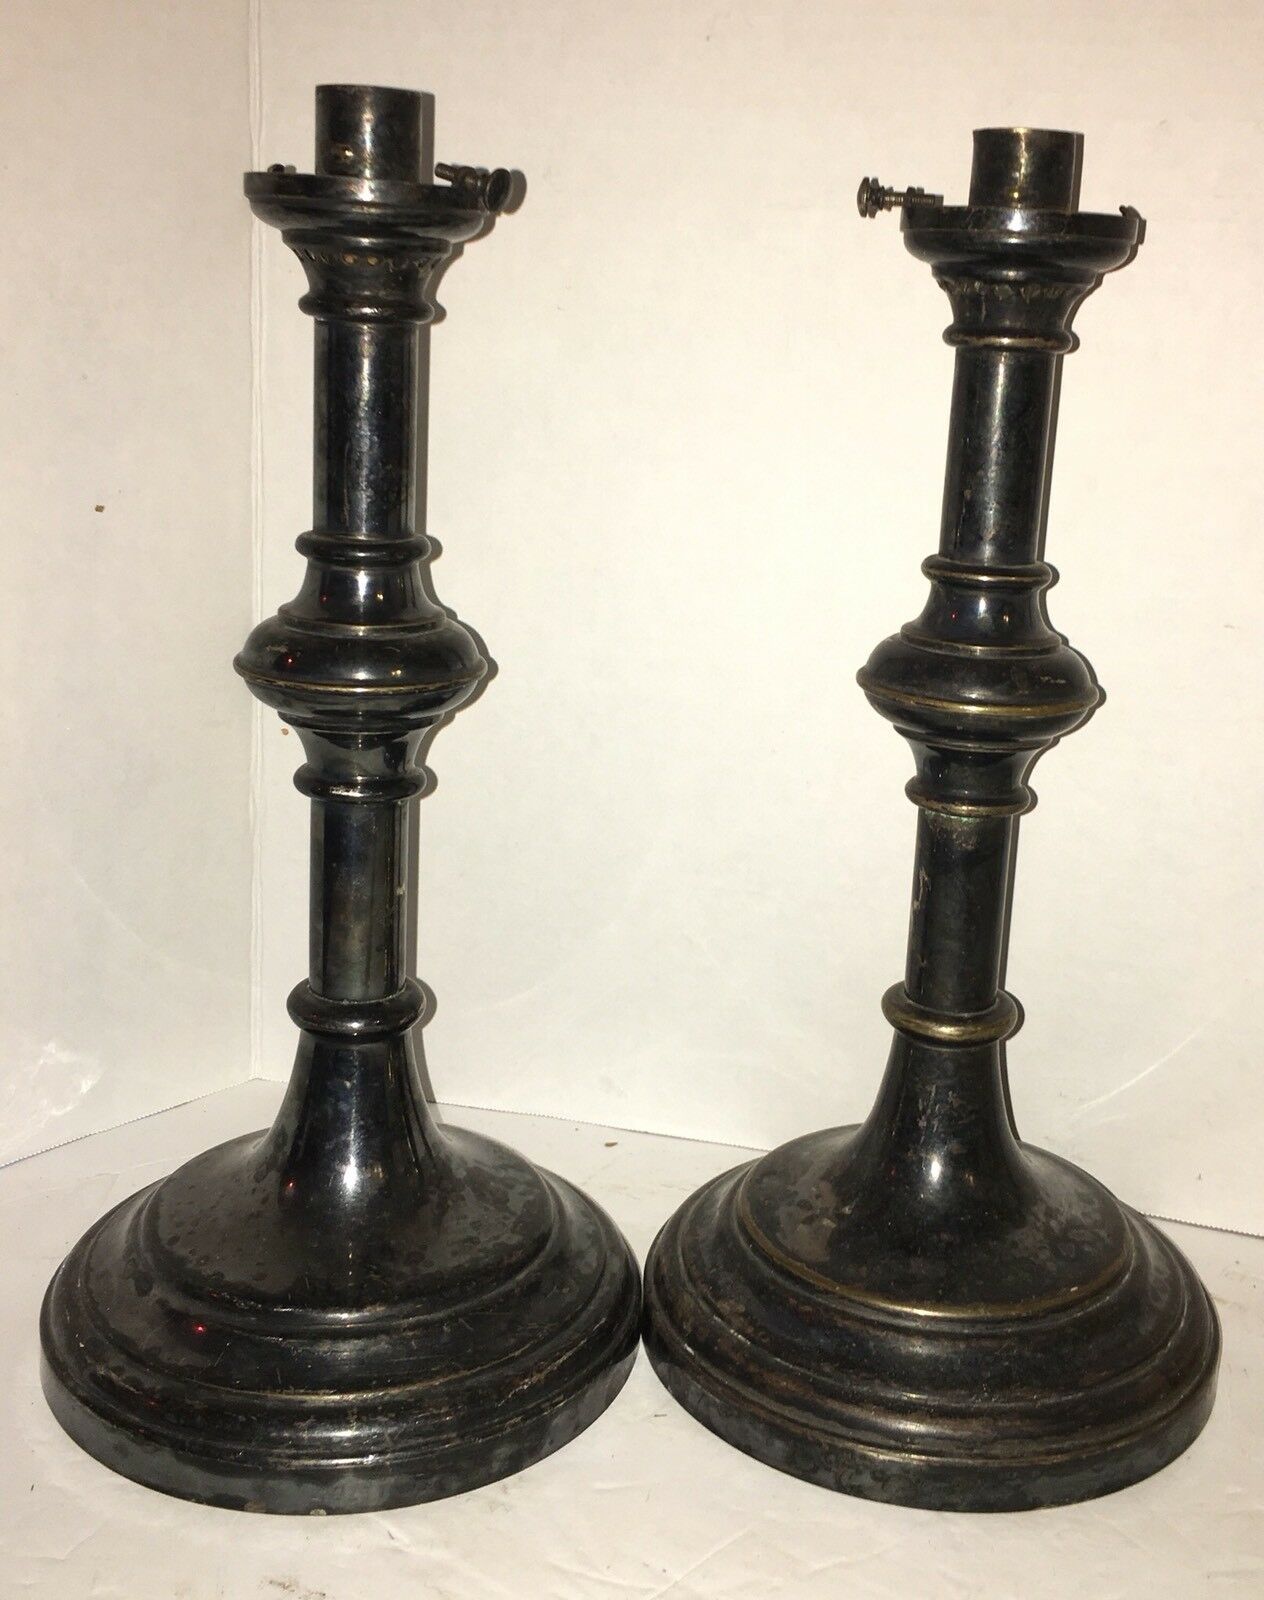 Large Pair Antique Georgian Silver Plate Candle Holders 19th Century Sheffield